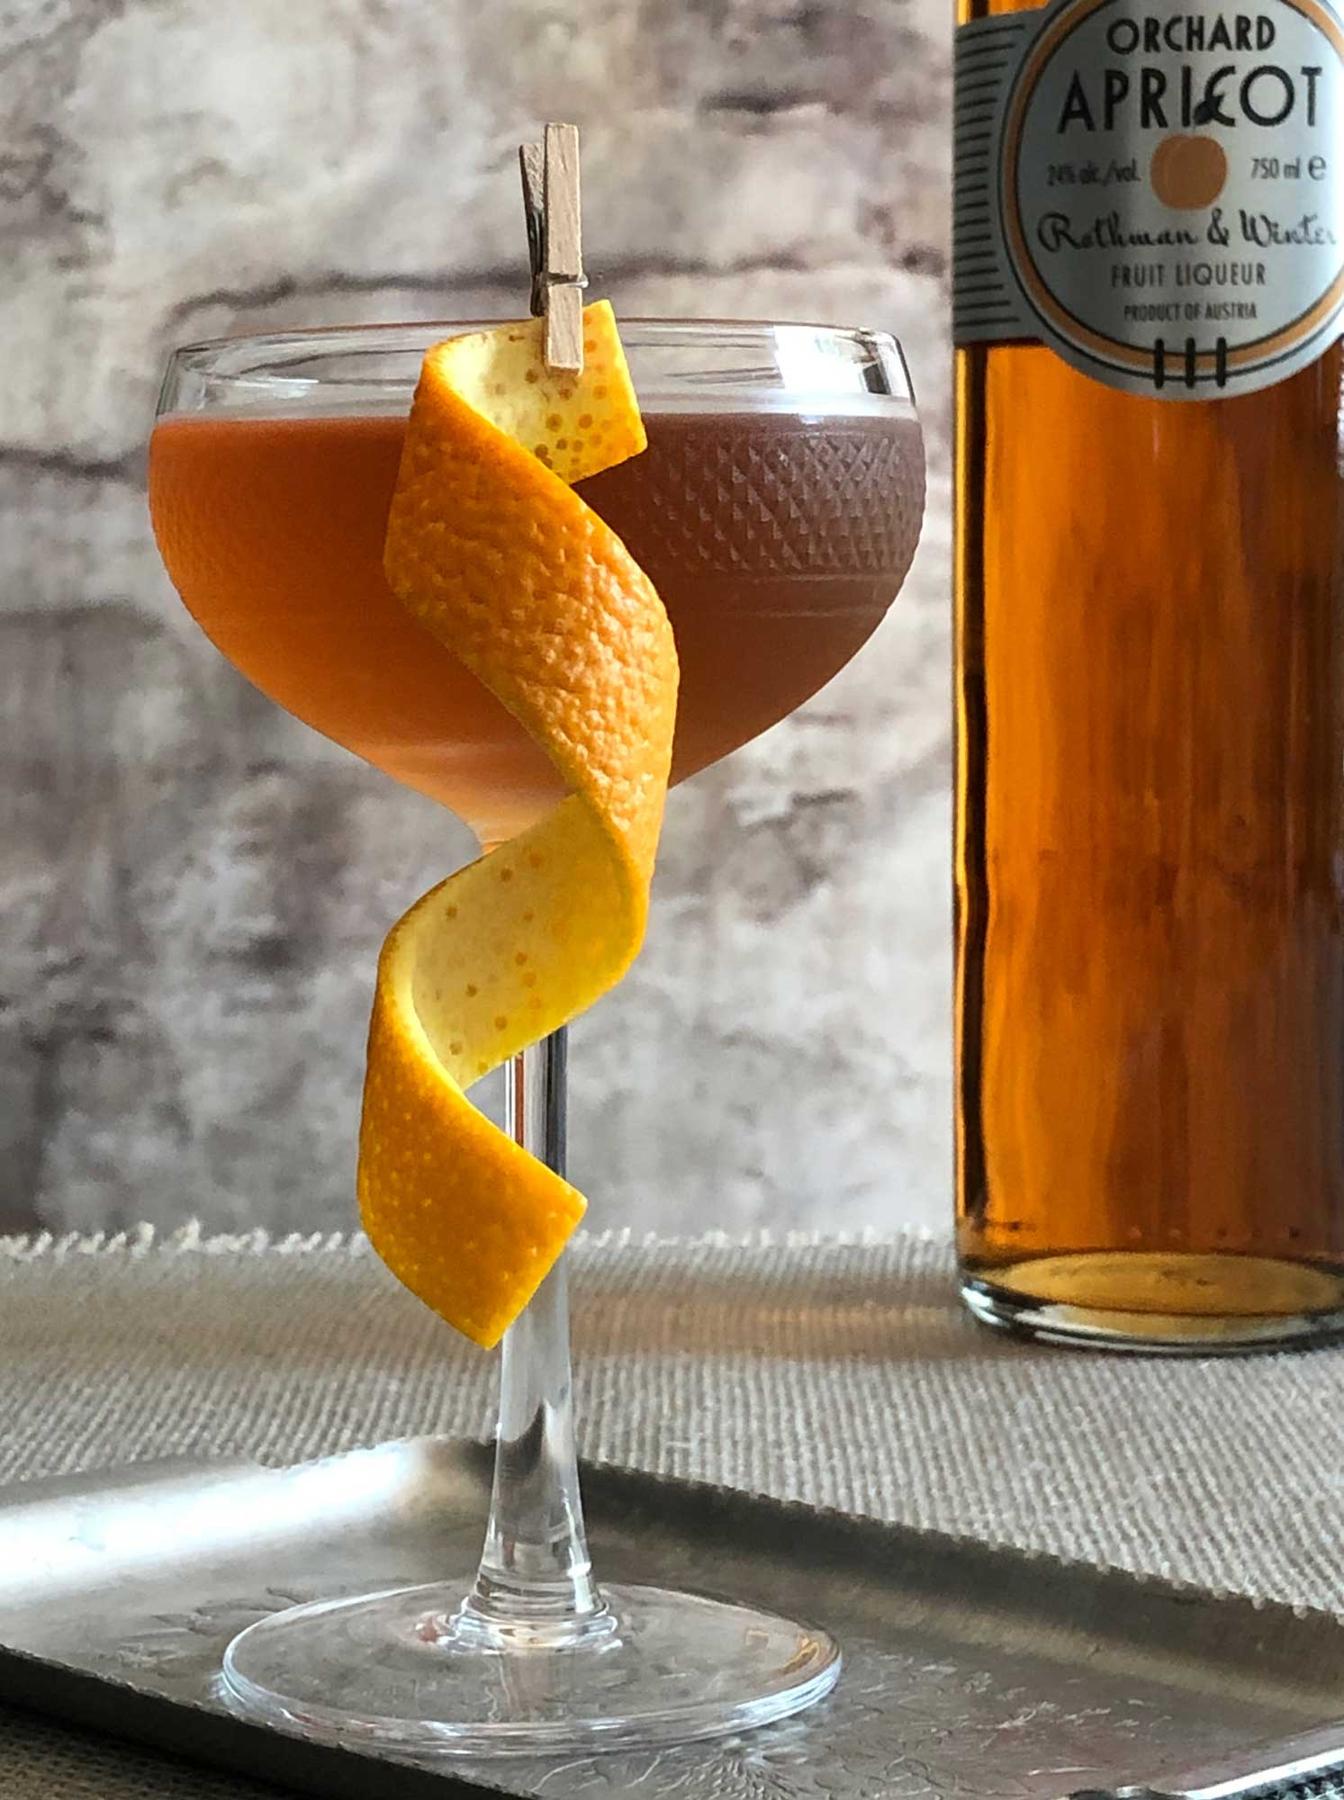 An example of the Angel Face, the mixed drink (drink), by Savoy Cocktail Book, featuring Hayman’s London Dry Gin, calvados, Rothman & Winter Orchard Apricot Liqueur, and orange twist; photo by Lee Edwards